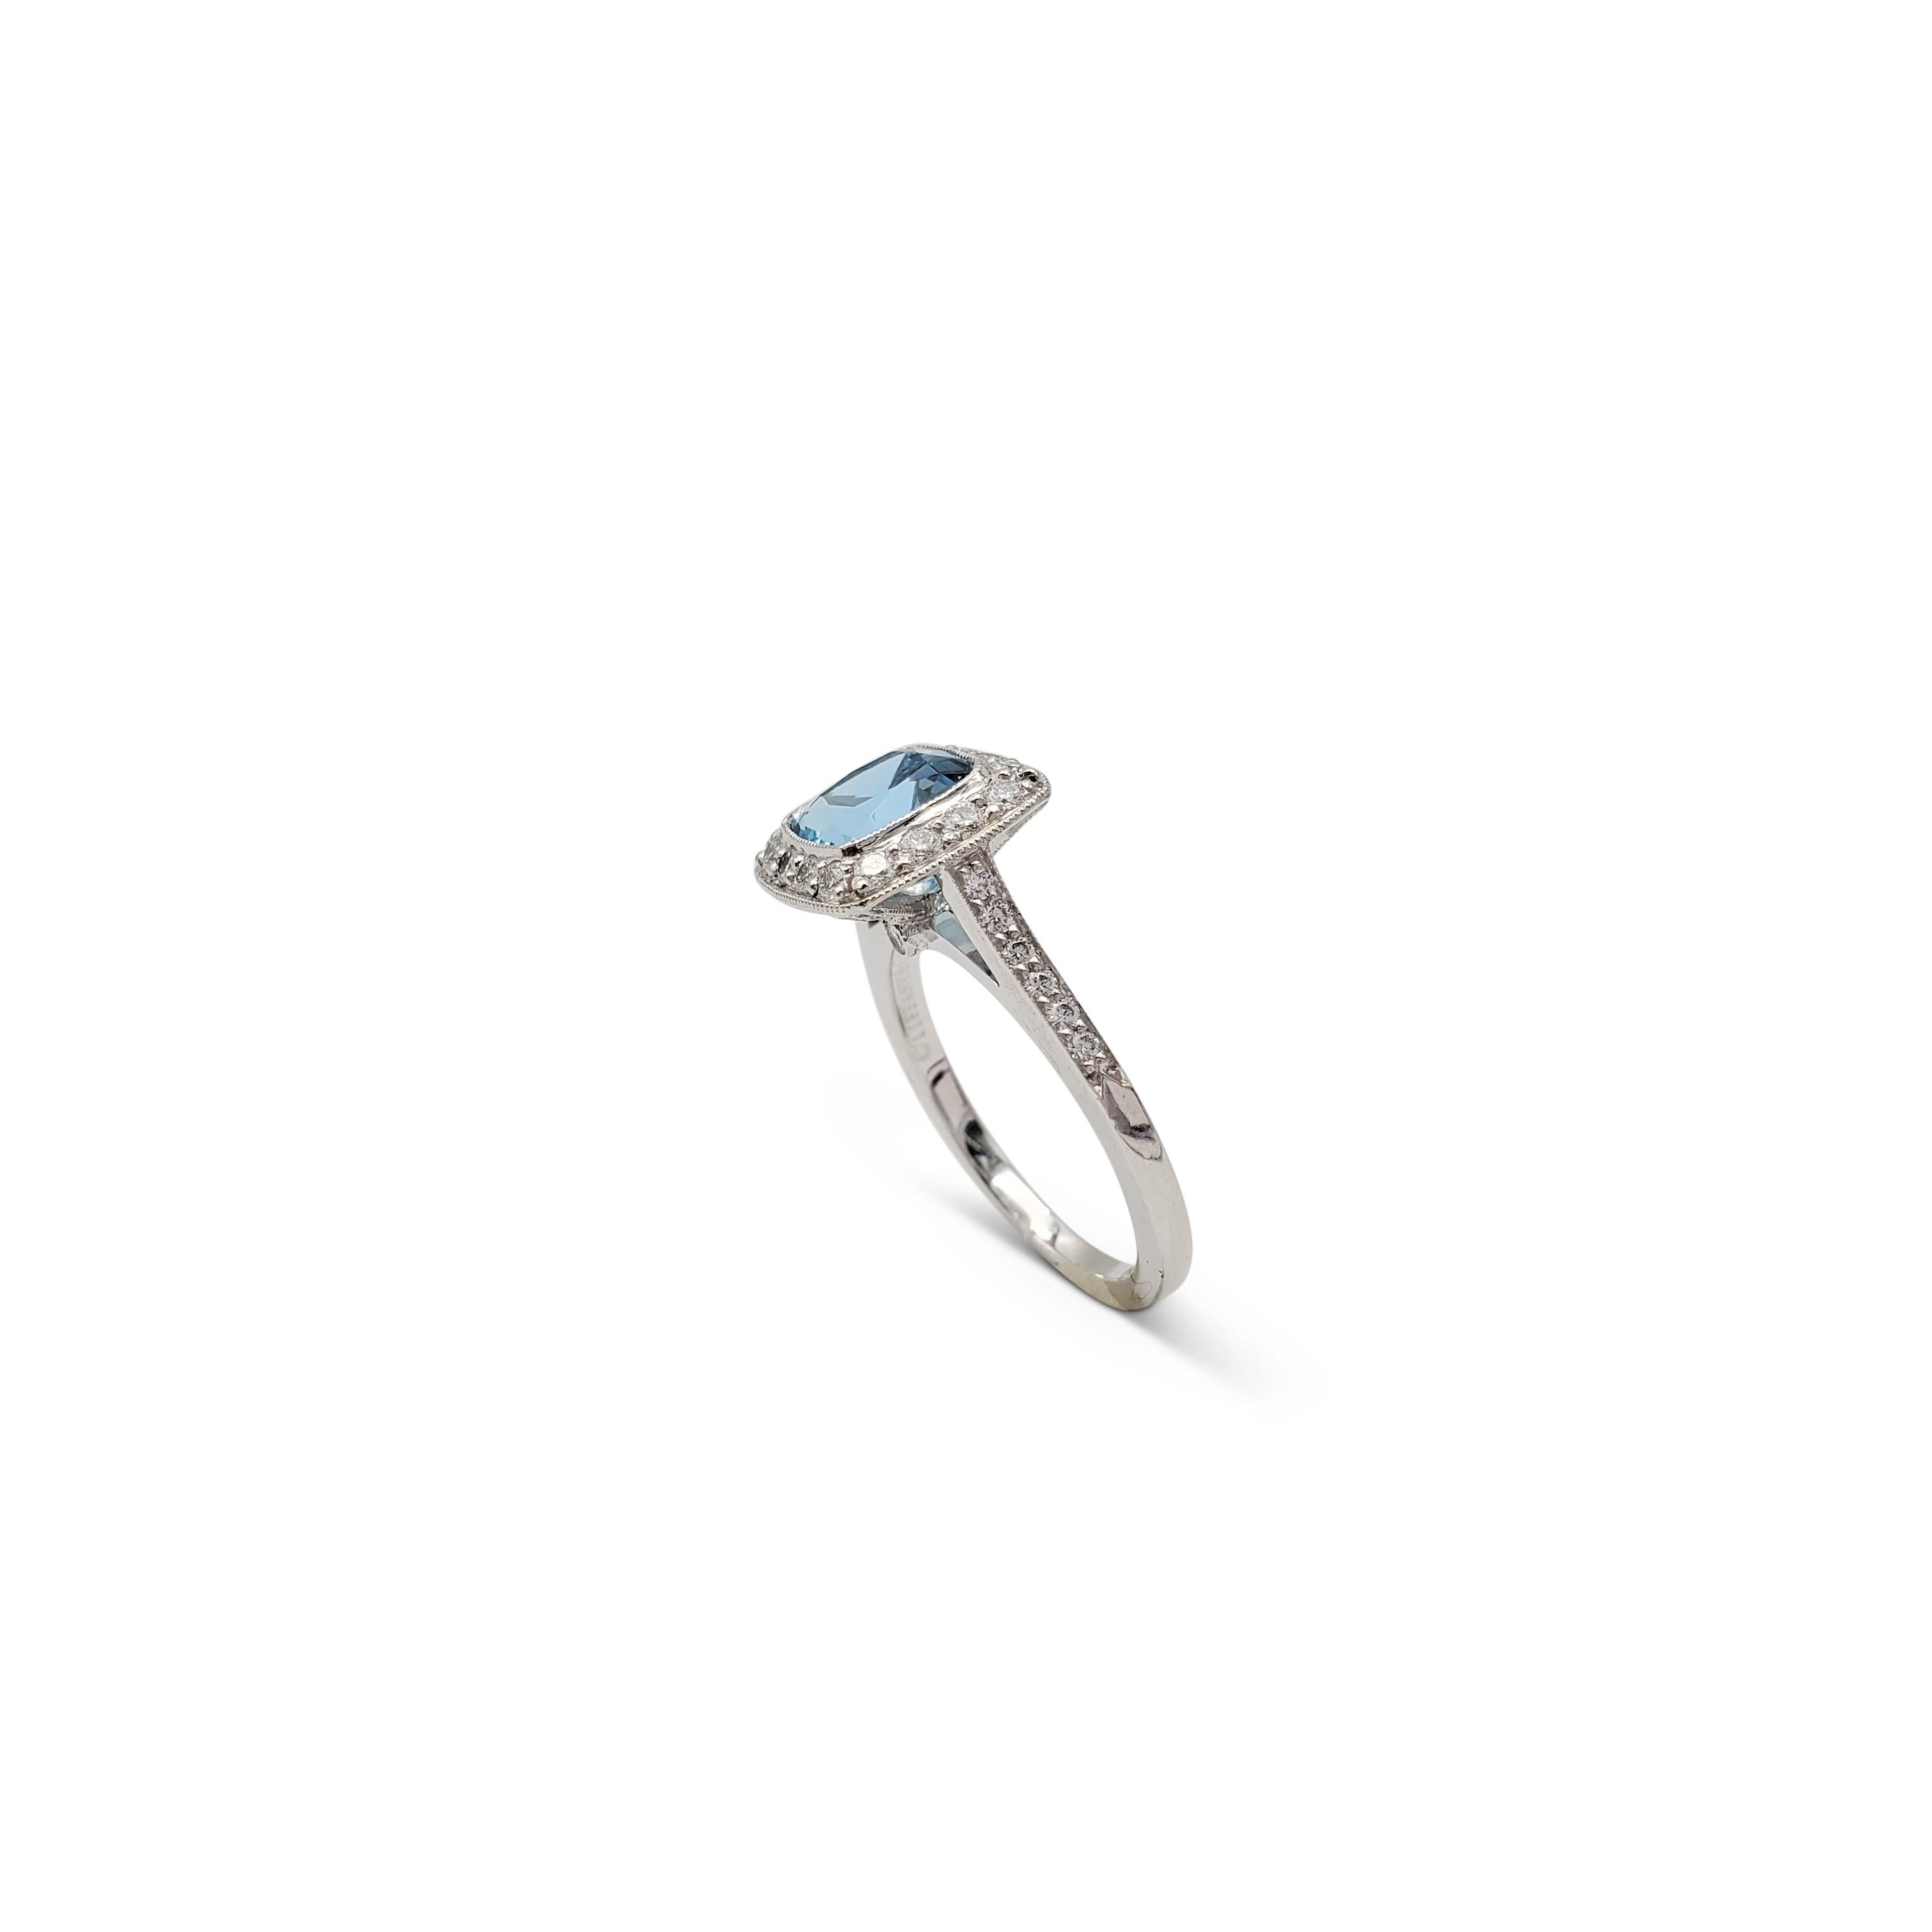 Authentic Tiffany & Co. 'Legacy' ring crafted in platinum centering on a cushion-cut aquamarine stone weighing an estimated 1.50 carats. The lively aquamarine stone is surrounded by high-quality round brilliant cut diamonds (E-F color, VS clarity)